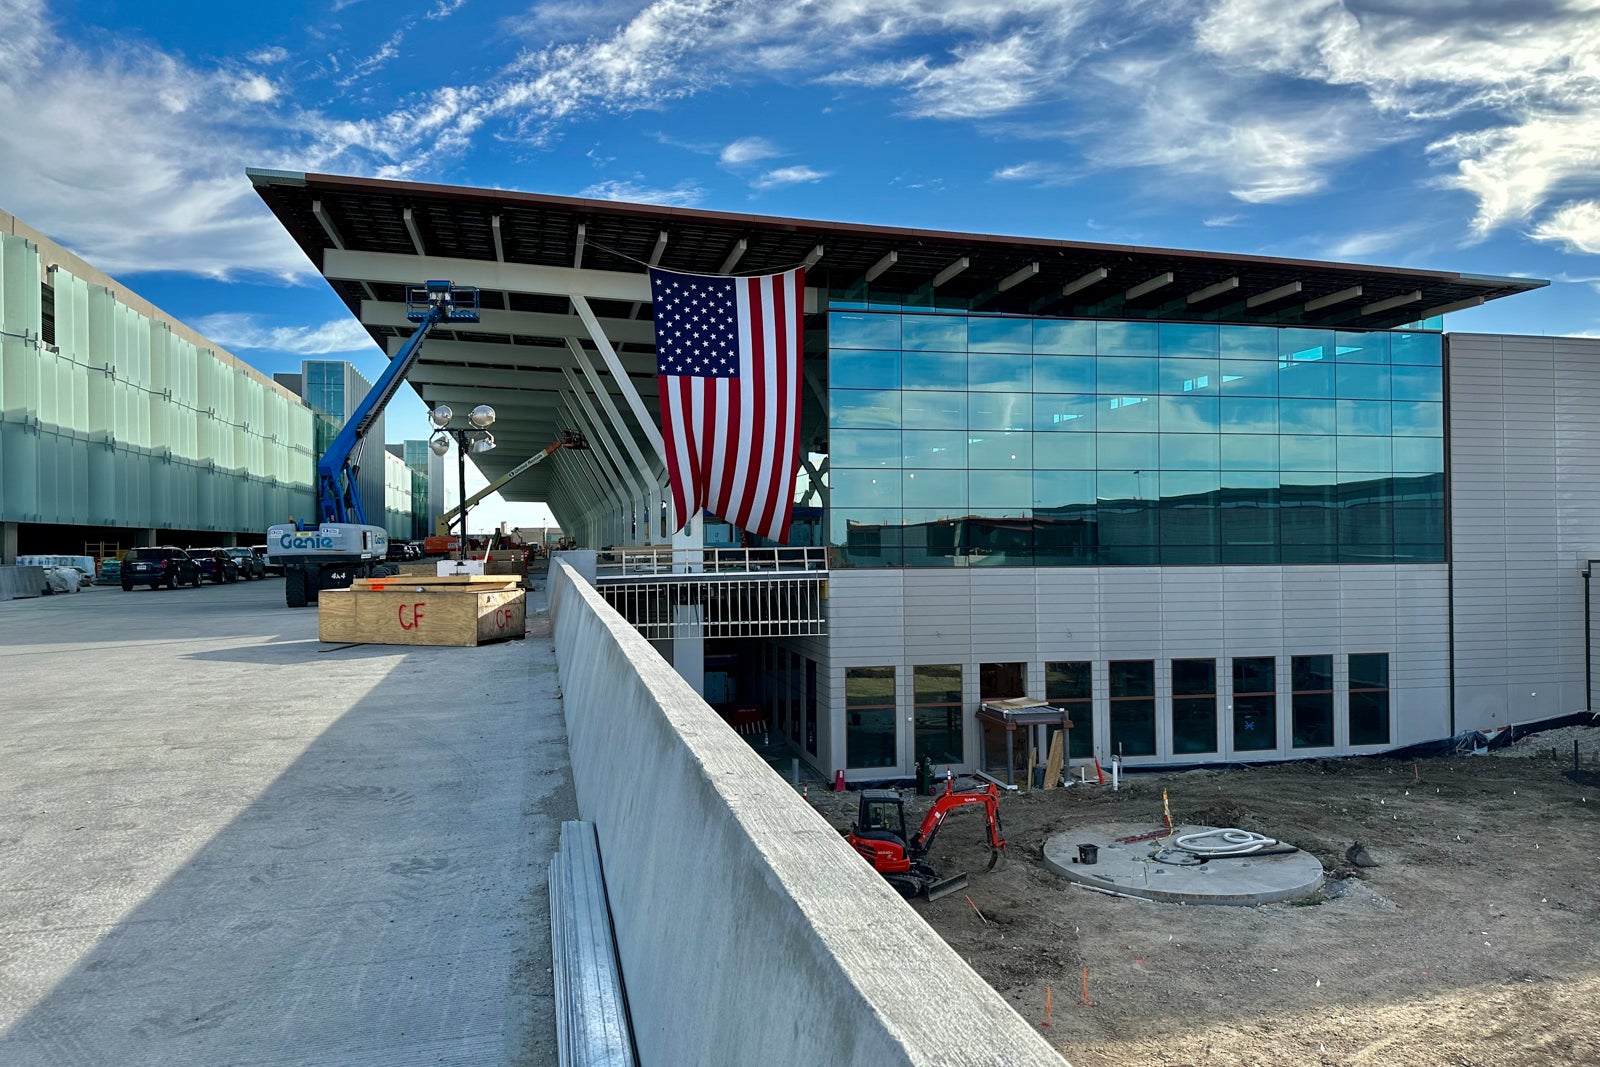 KCI welcomes the first flyers into a new airport terminal showing